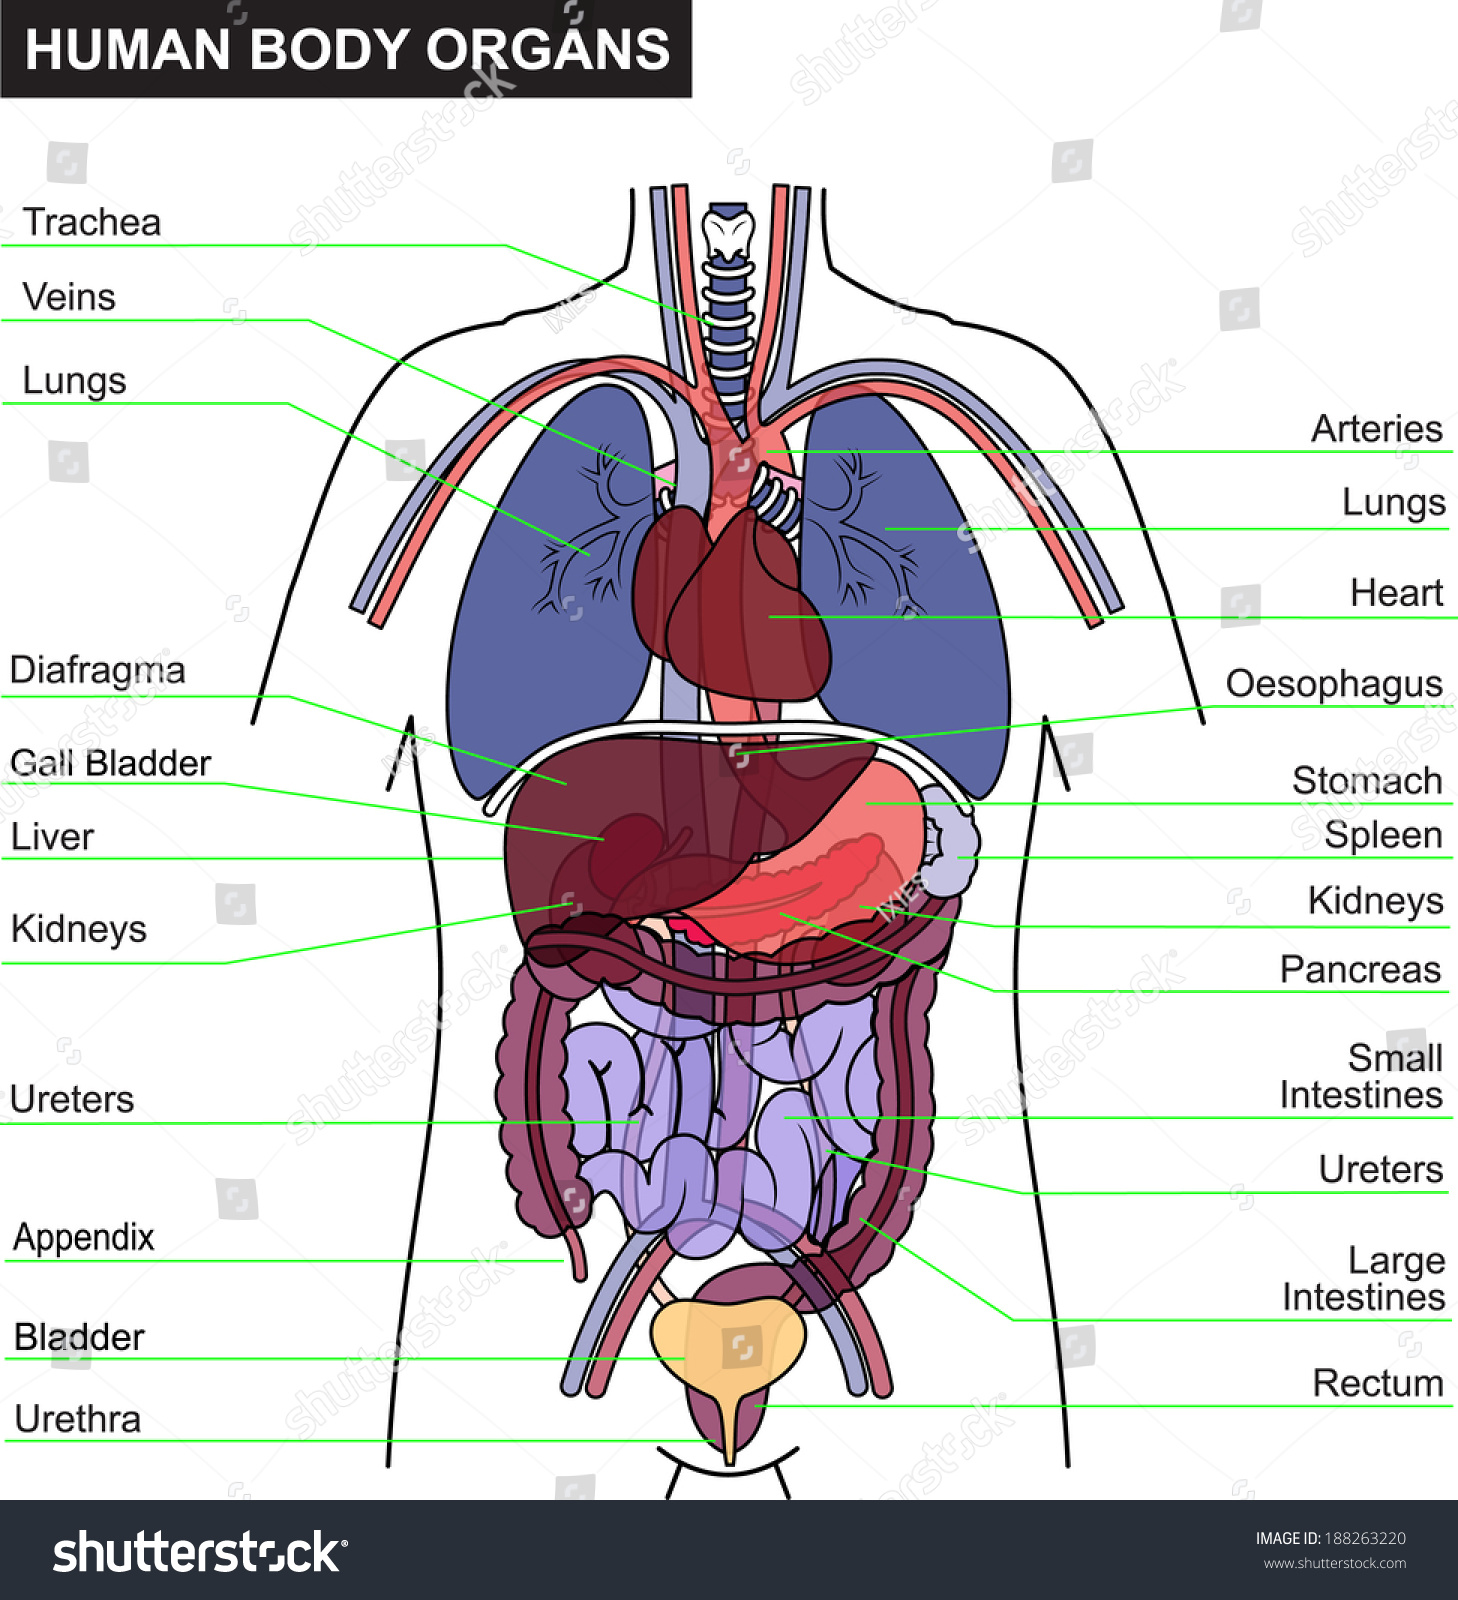 Anatomique Organes Anatomie Du Corps Organes Corps Humain | Hot Sex Picture